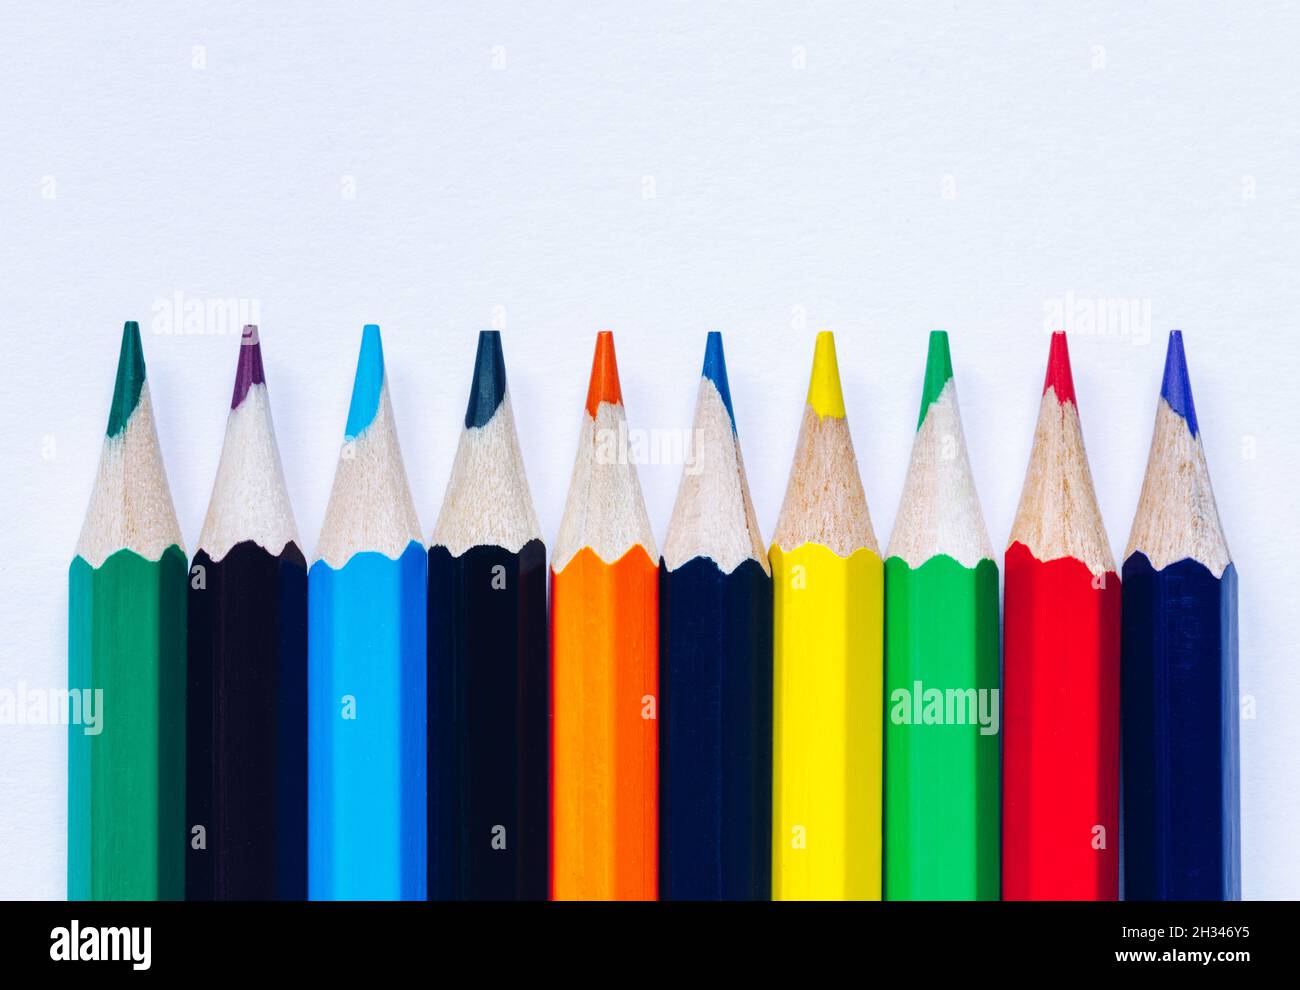 https://c8.alamy.com/comp/2H346Y5/color-pencils-isolated-on-white-background-close-up-of-colored-rainbow-pencils-for-drawing-concept-of-preparing-for-school-and-discounts-on-statione-2H346Y5.jpg